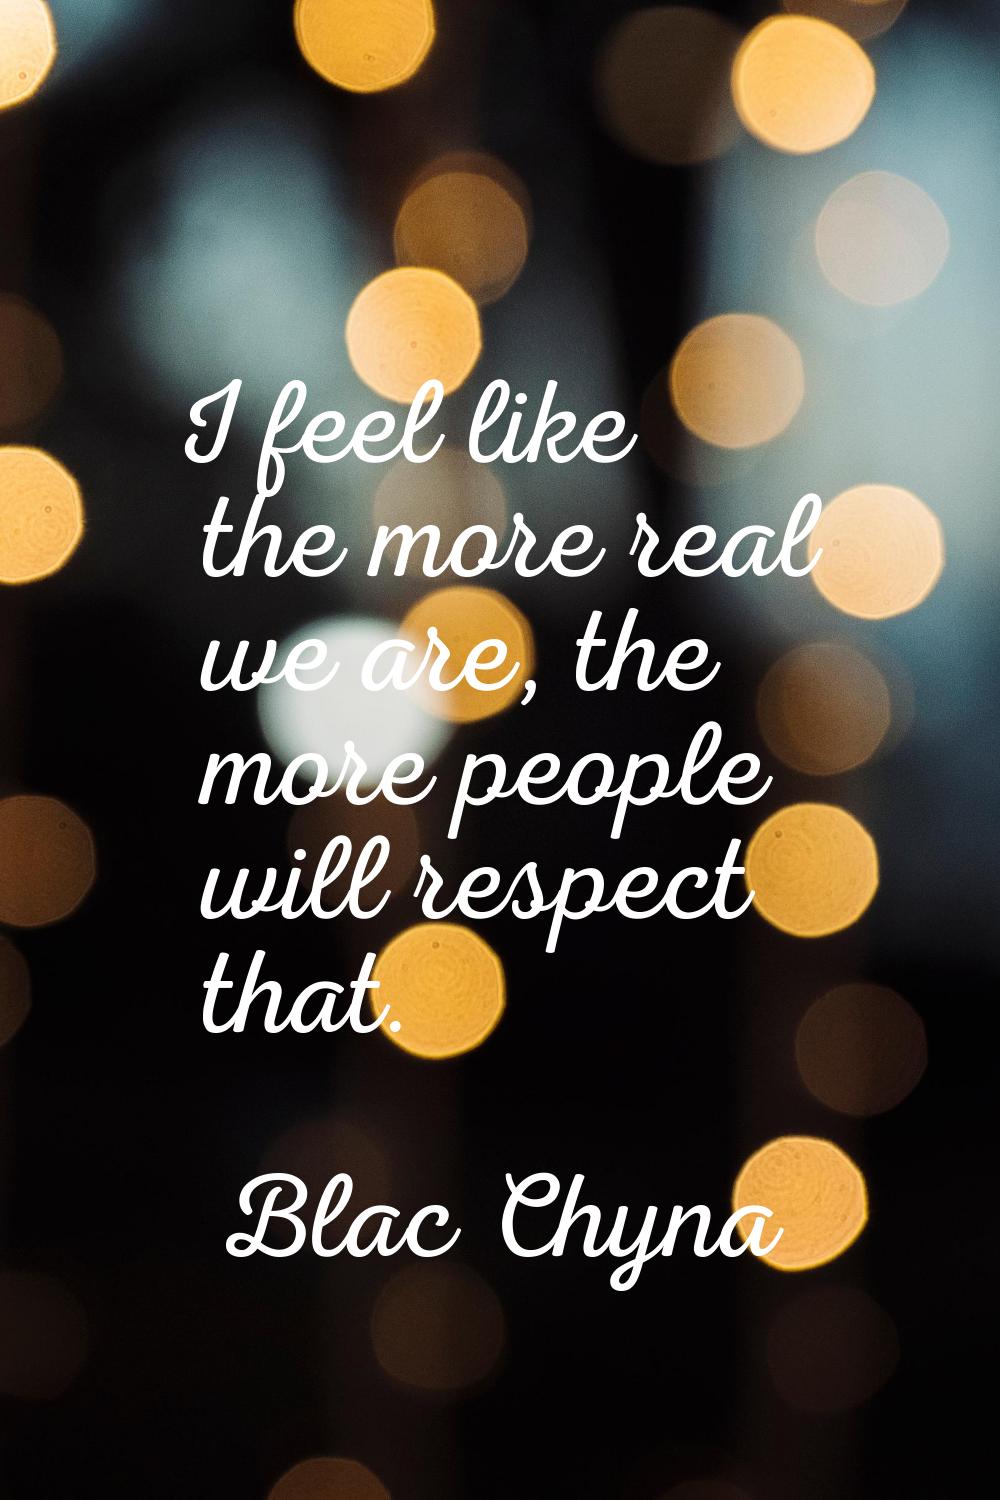 I feel like the more real we are, the more people will respect that.